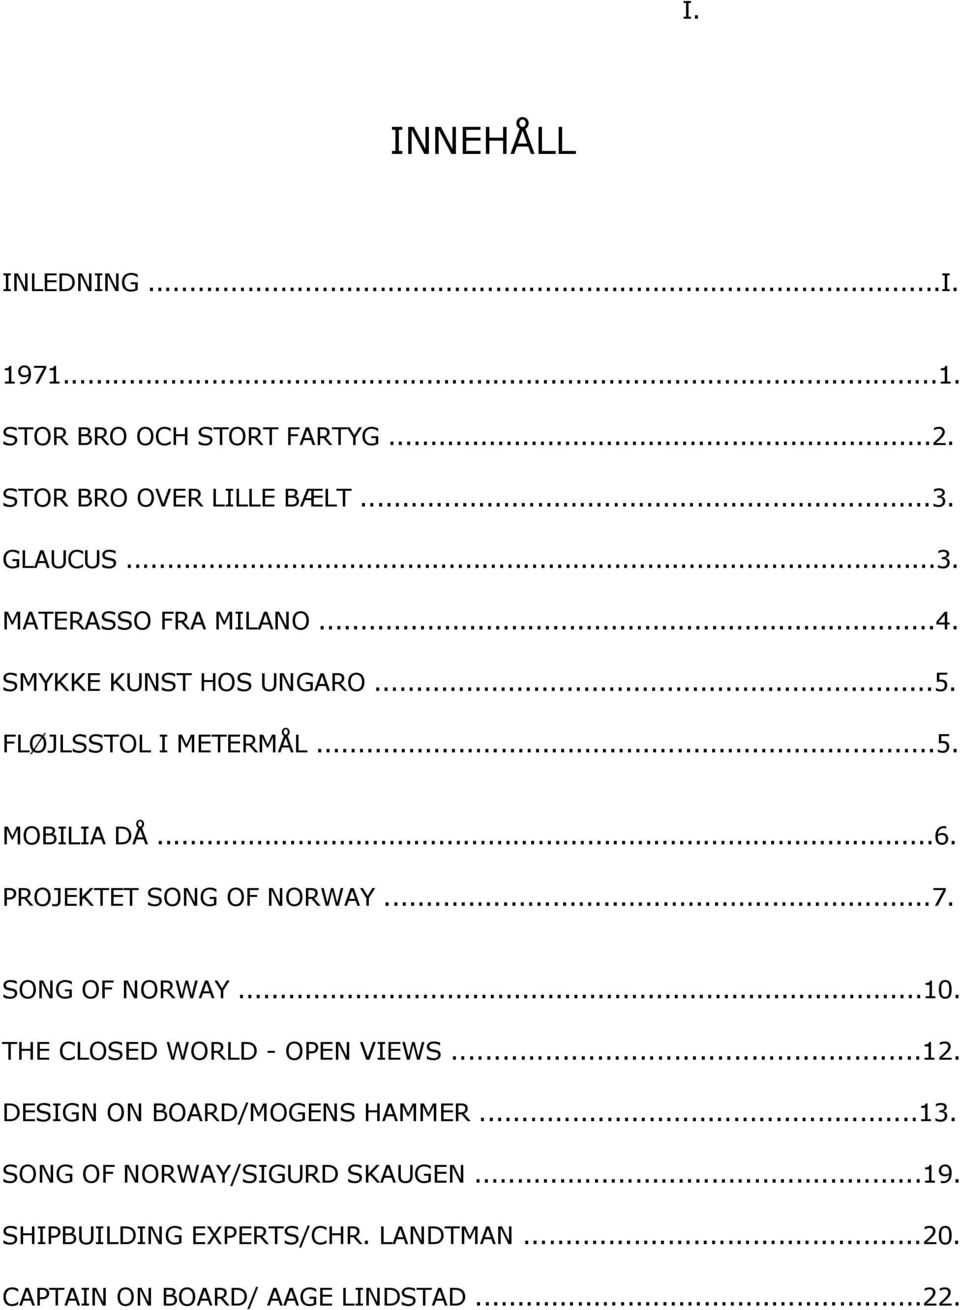 PROJEKTET SONG OF NORWAY...7. SONG OF NORWAY...10. THE CLOSED WORLD - OPEN VIEWS...12.